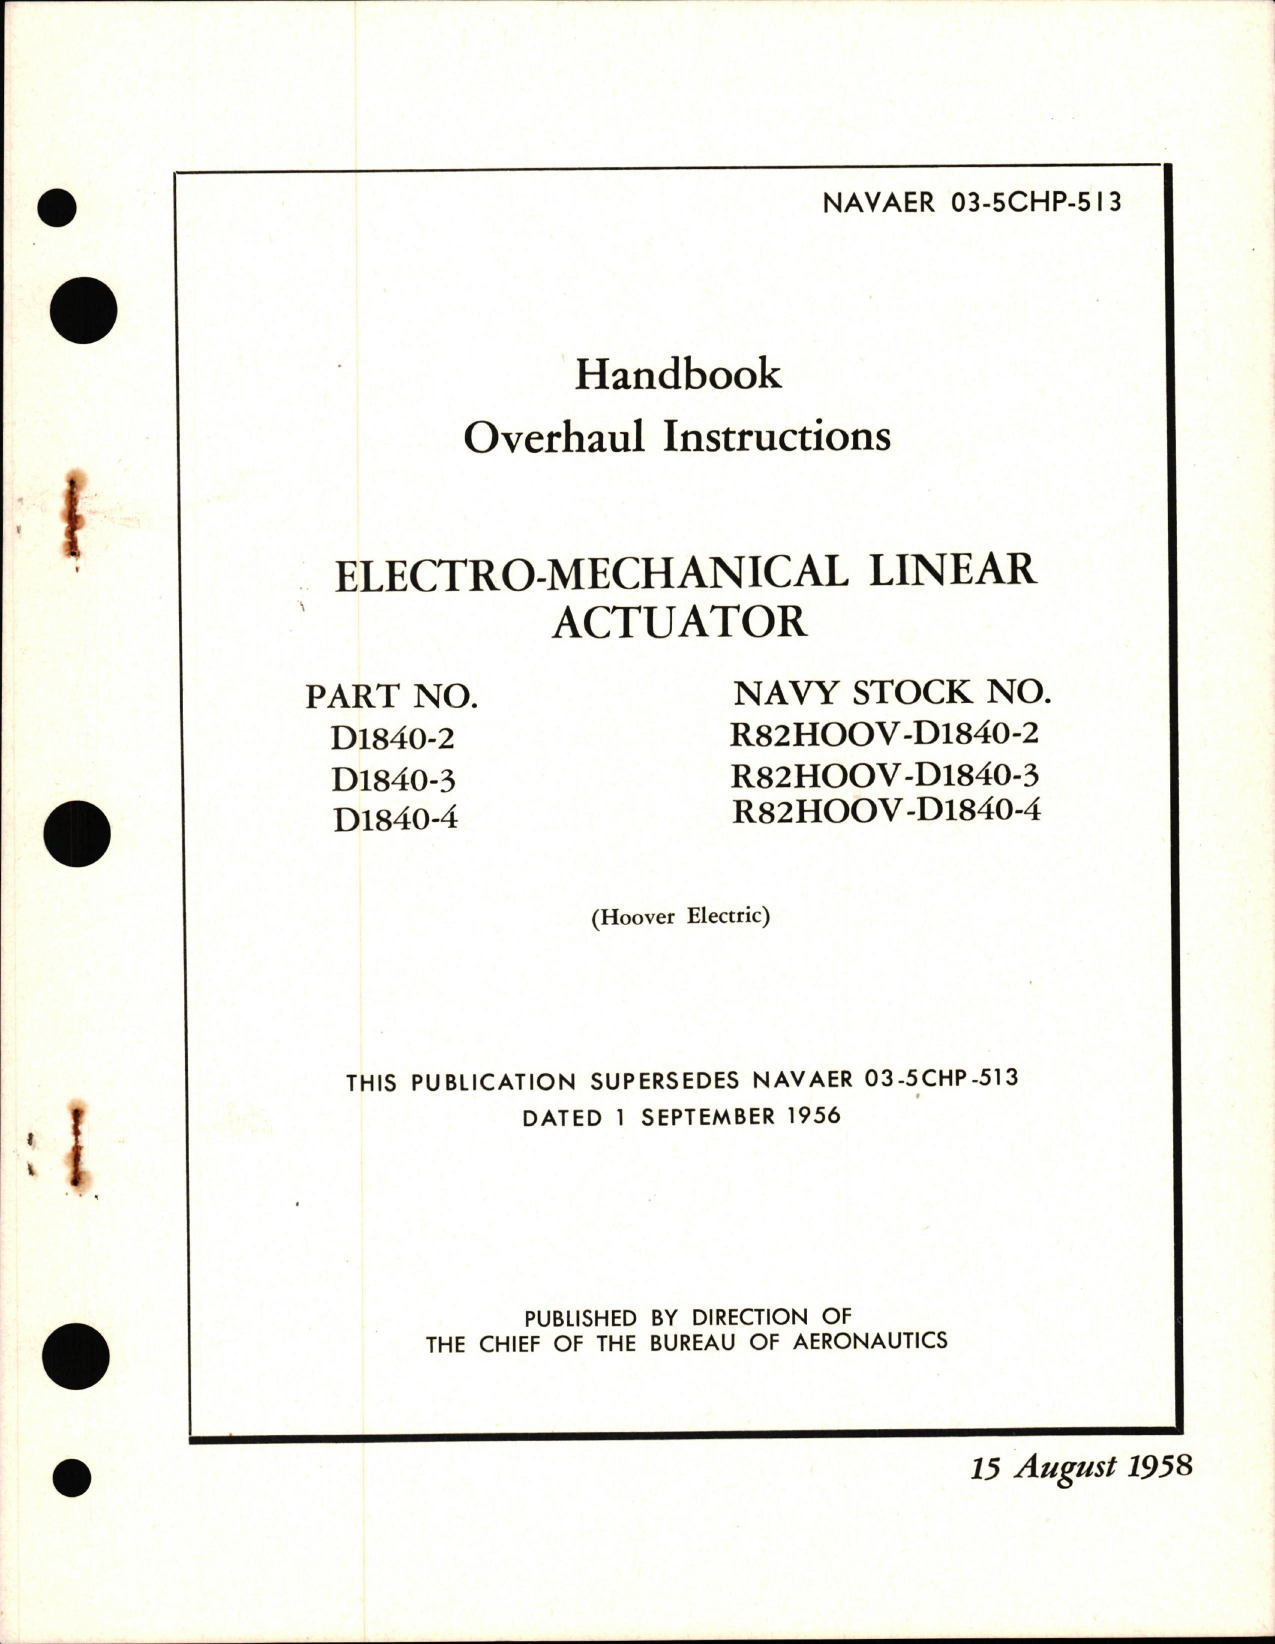 Sample page 1 from AirCorps Library document: Overhaul Instructions for Electro-Mechanical Linear Actuator Parts D1840-2, D1840-3 and D1840-4